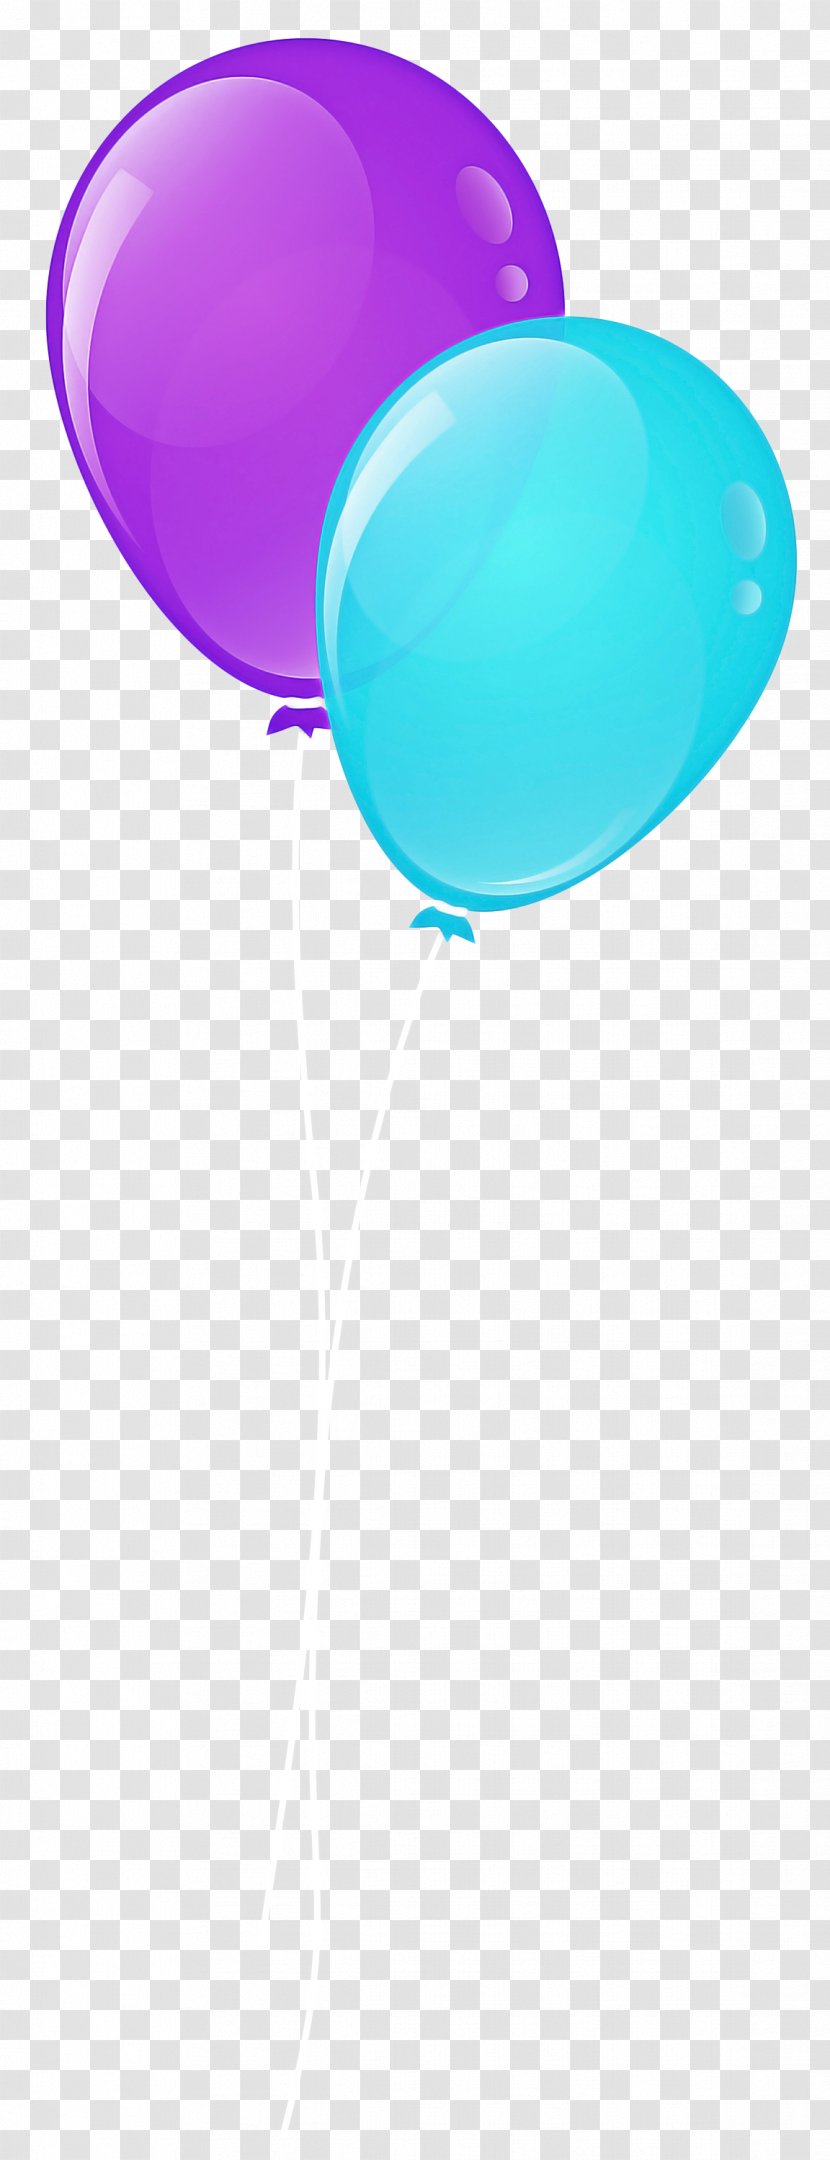 Blue Balloon - Turquoise - Material Property Party Supply Transparent PNG